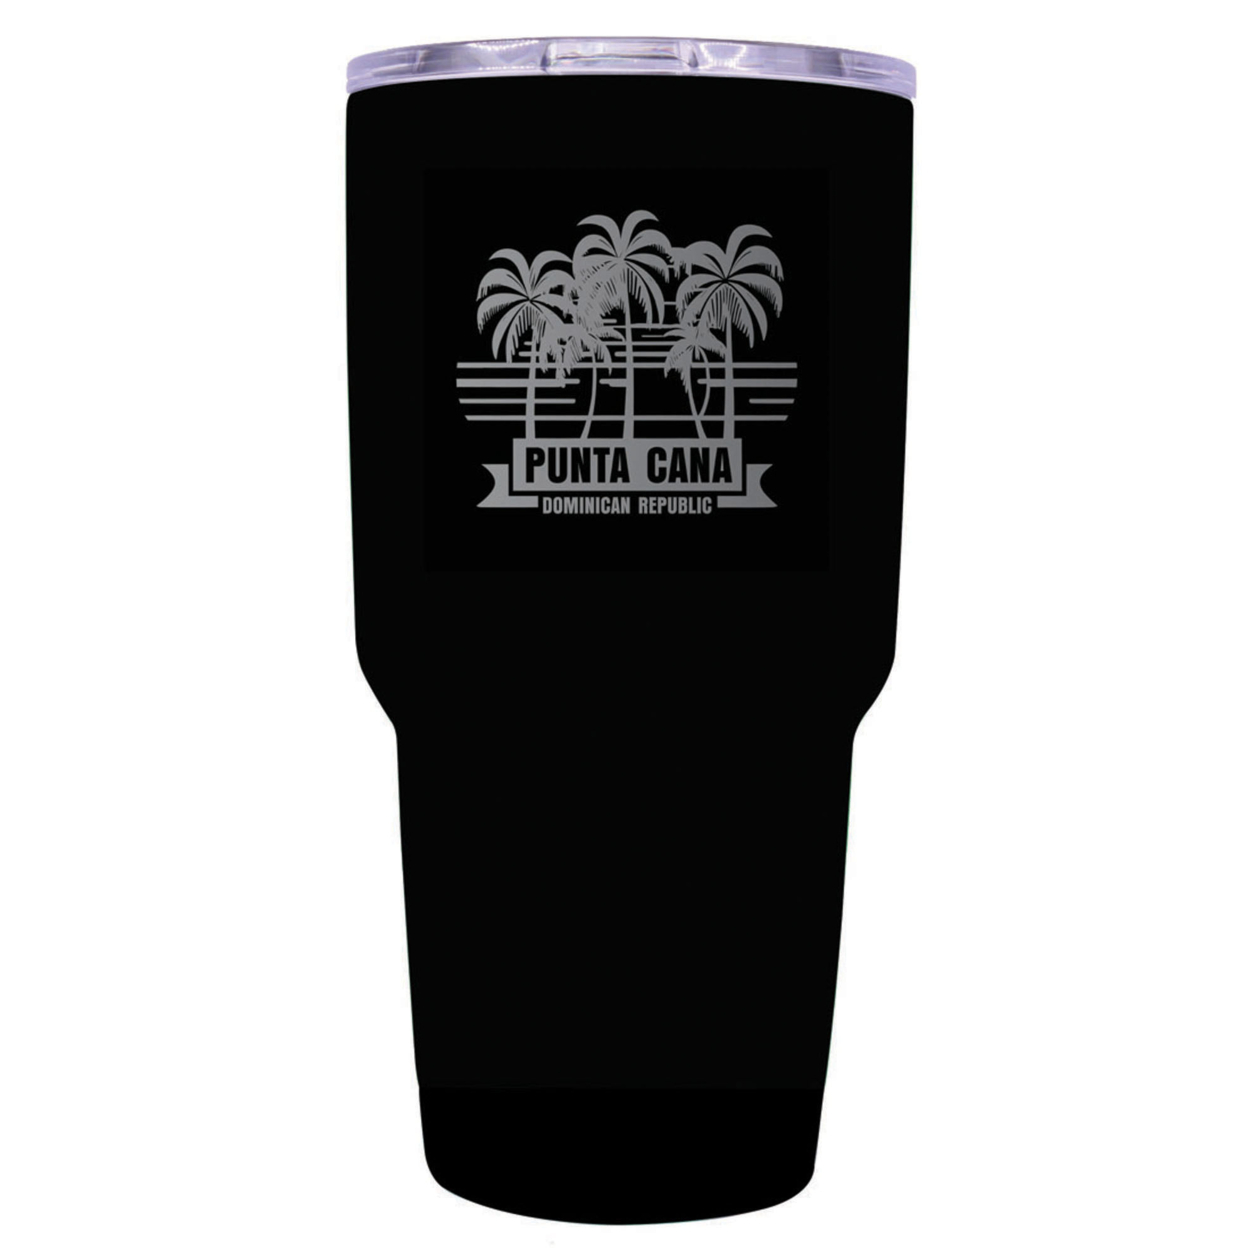 Punta Cana Dominican Republic Souvenir 24 Oz Insulated Stainless Steel Tumbler Etched - Seafoam, PALM BEACH